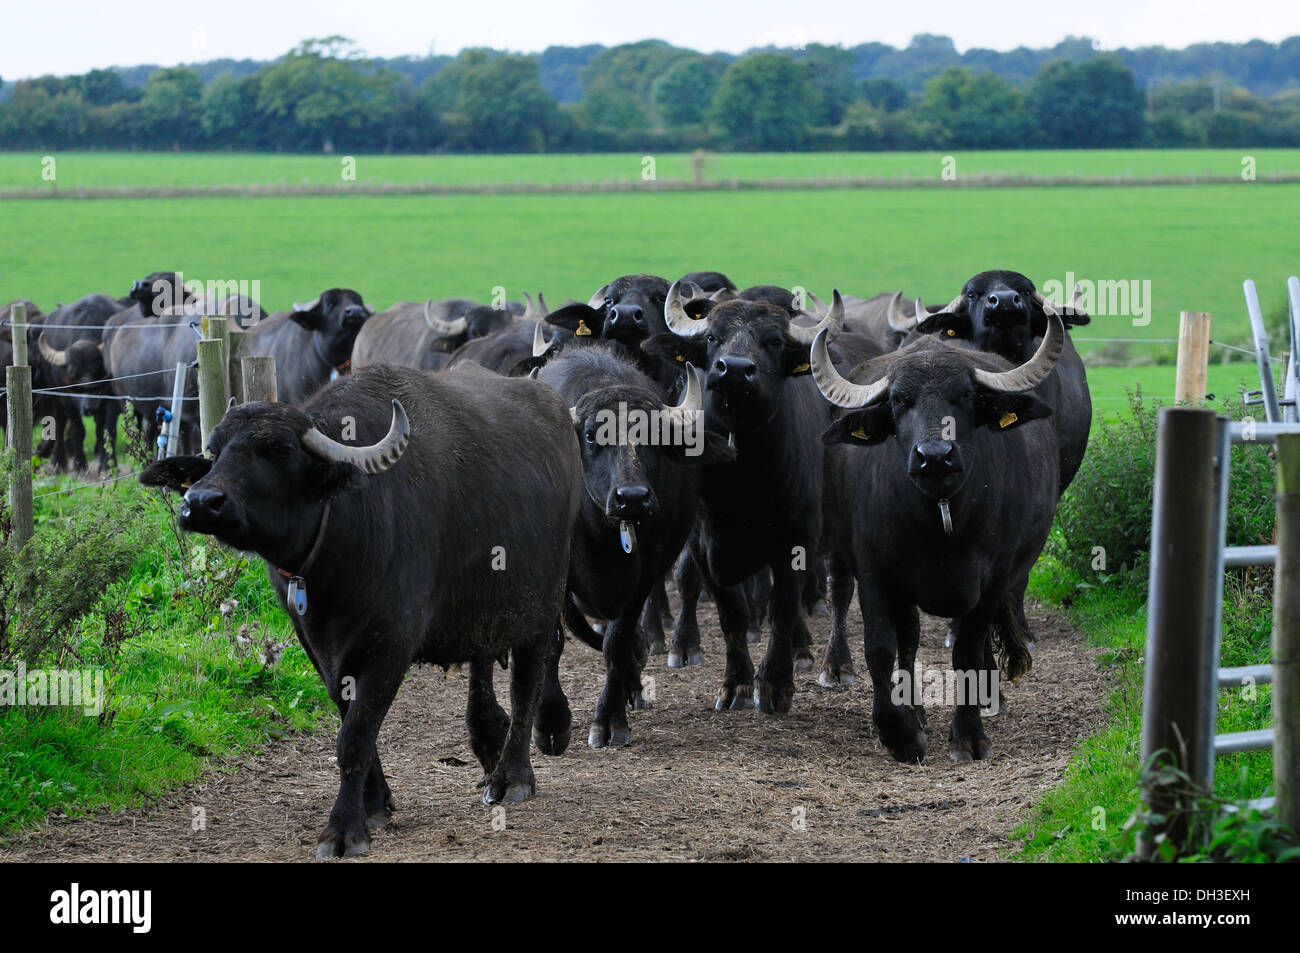 Buffalo Farm High Resolution Stock Photography and Images - Alamy